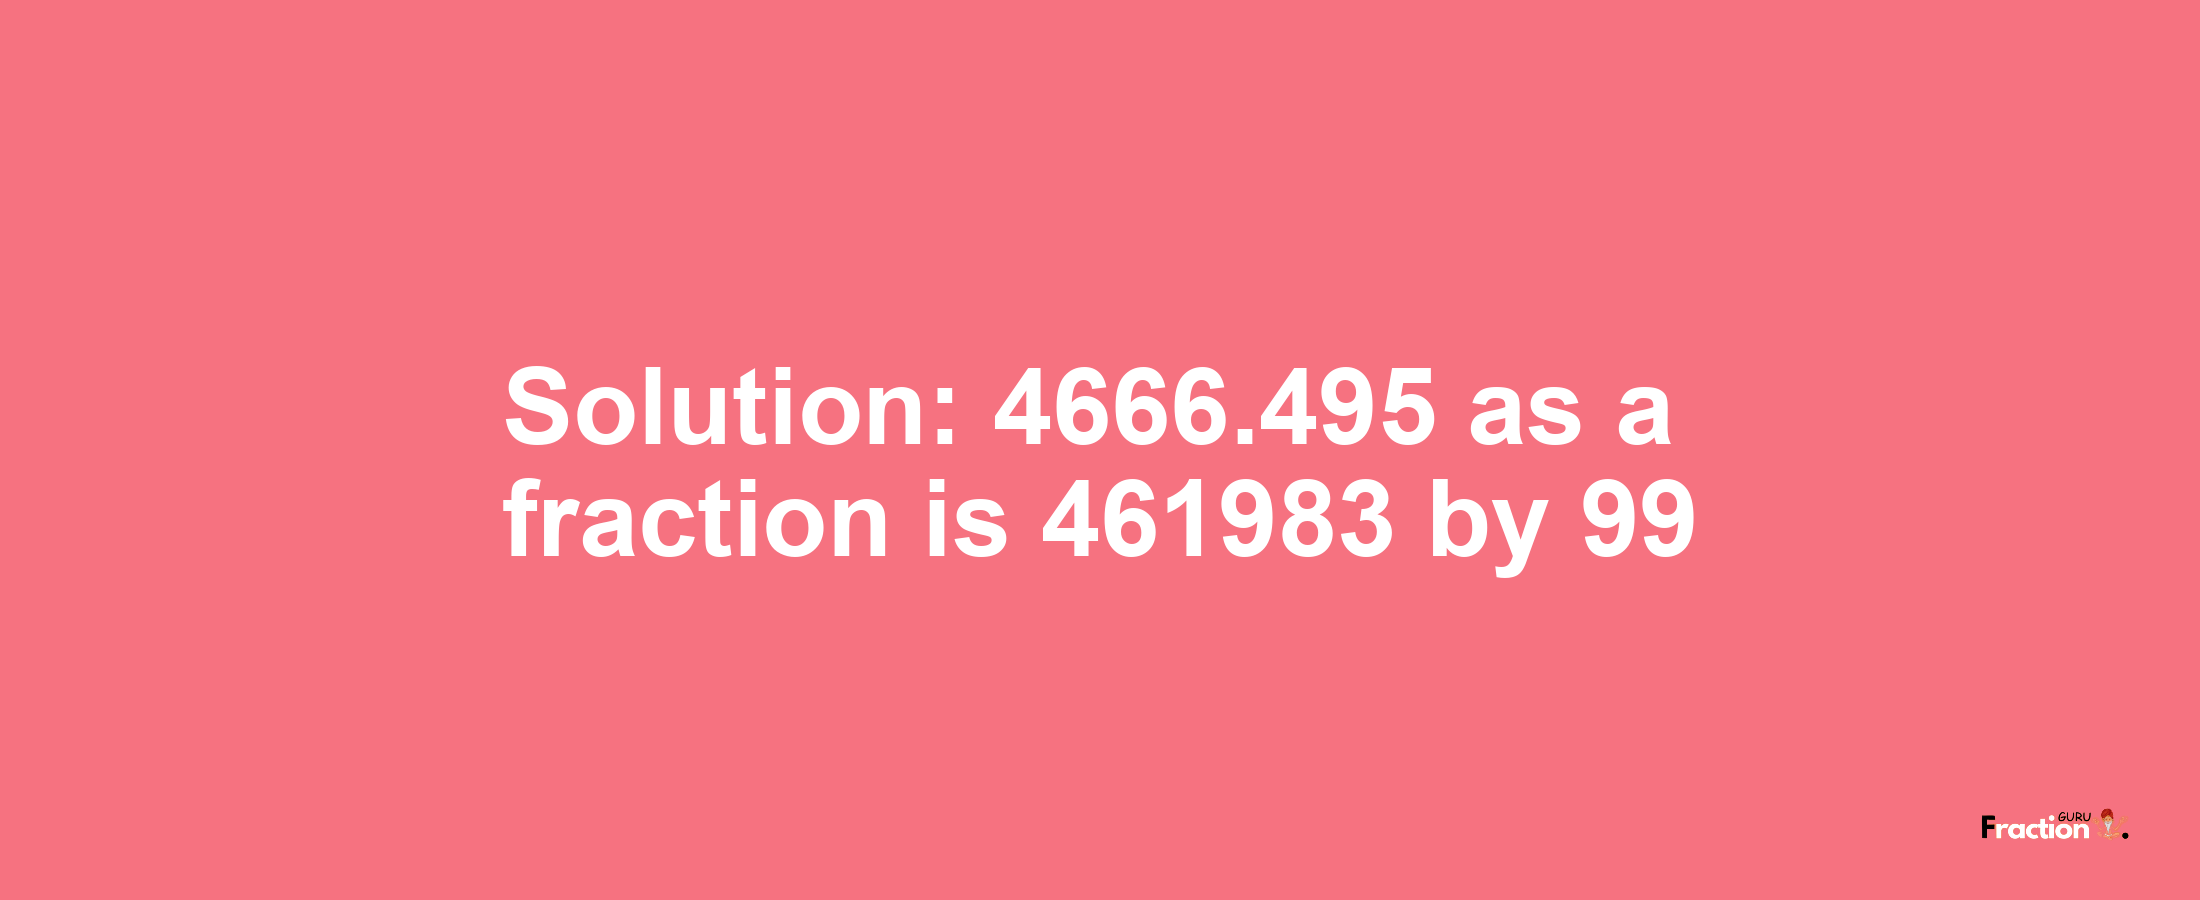 Solution:4666.495 as a fraction is 461983/99